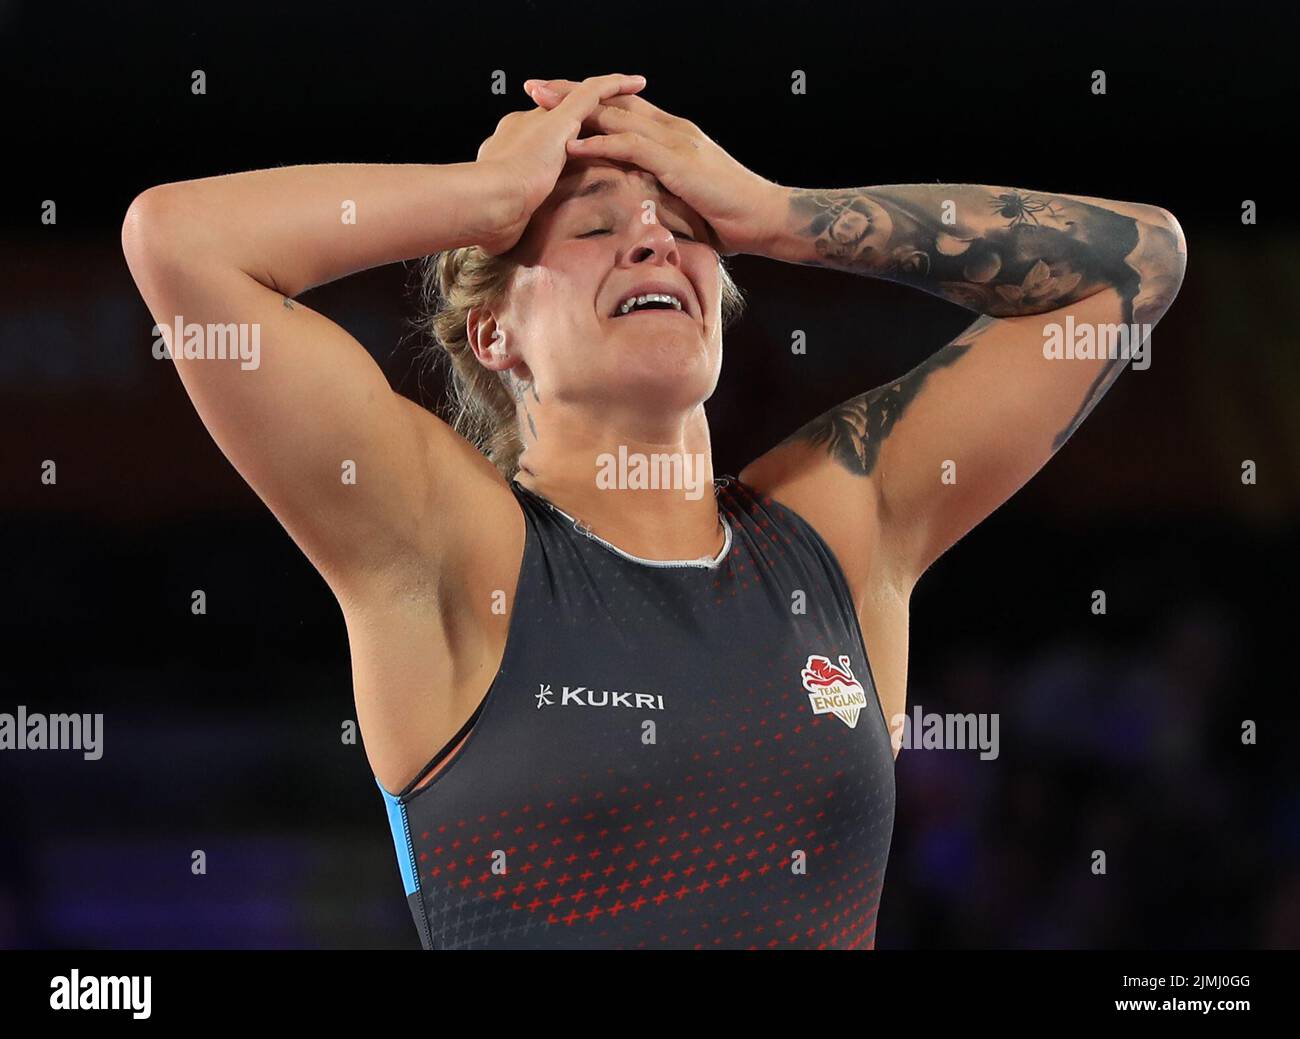 England’s Georgina Nelthorpeat celebrates winning against Sierra Leone’s in the Women’s 76kg Bronze Medal match at the Coventry Arena on day nine of the 2022 Commonwealth Games. Picture date: Saturday August 6, 2022. Stock Photo